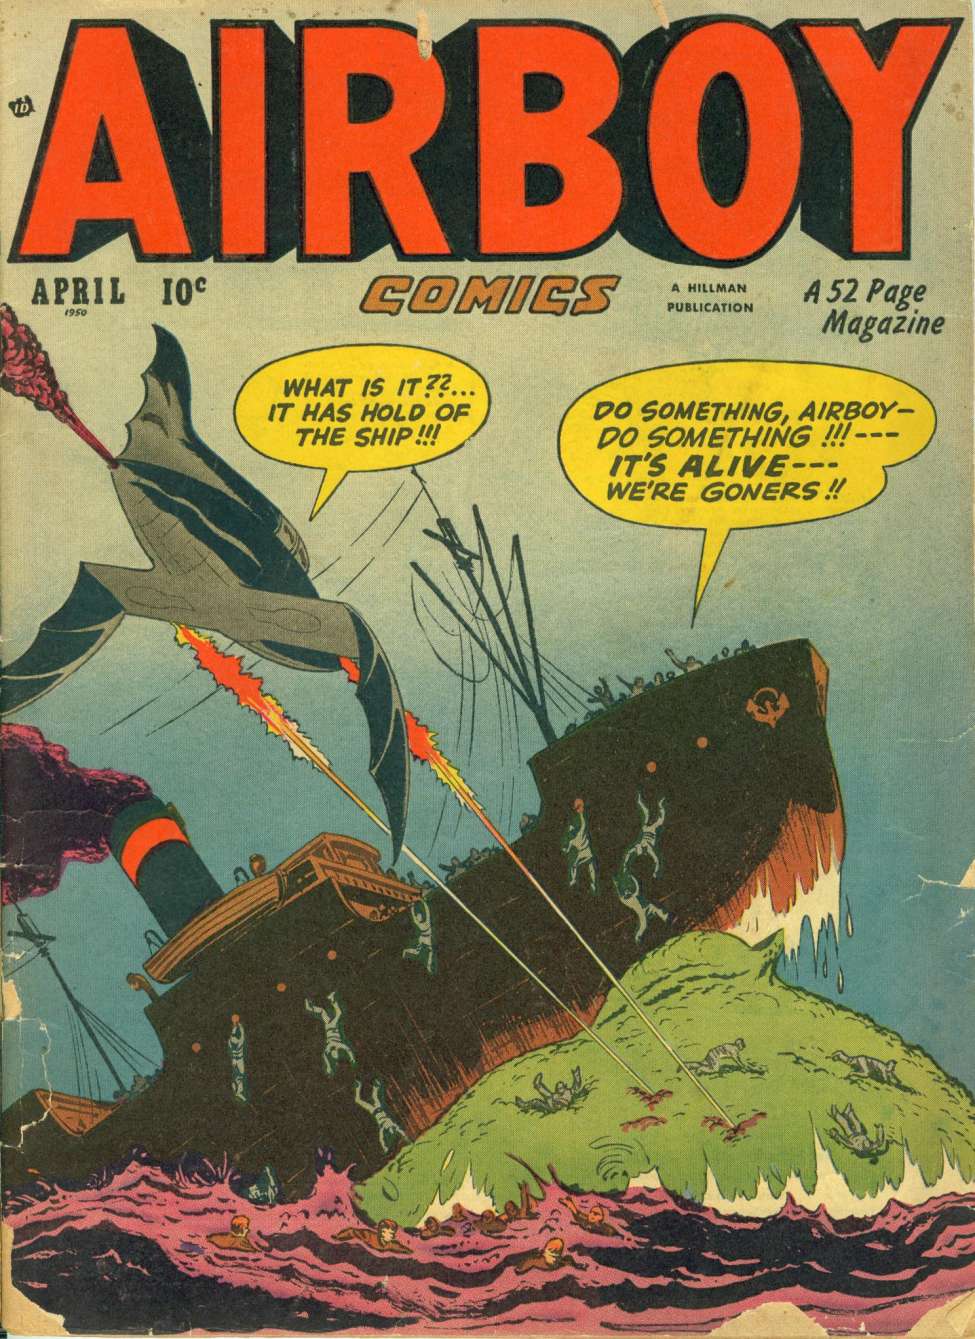 Book Cover For Airboy Comics v7 3